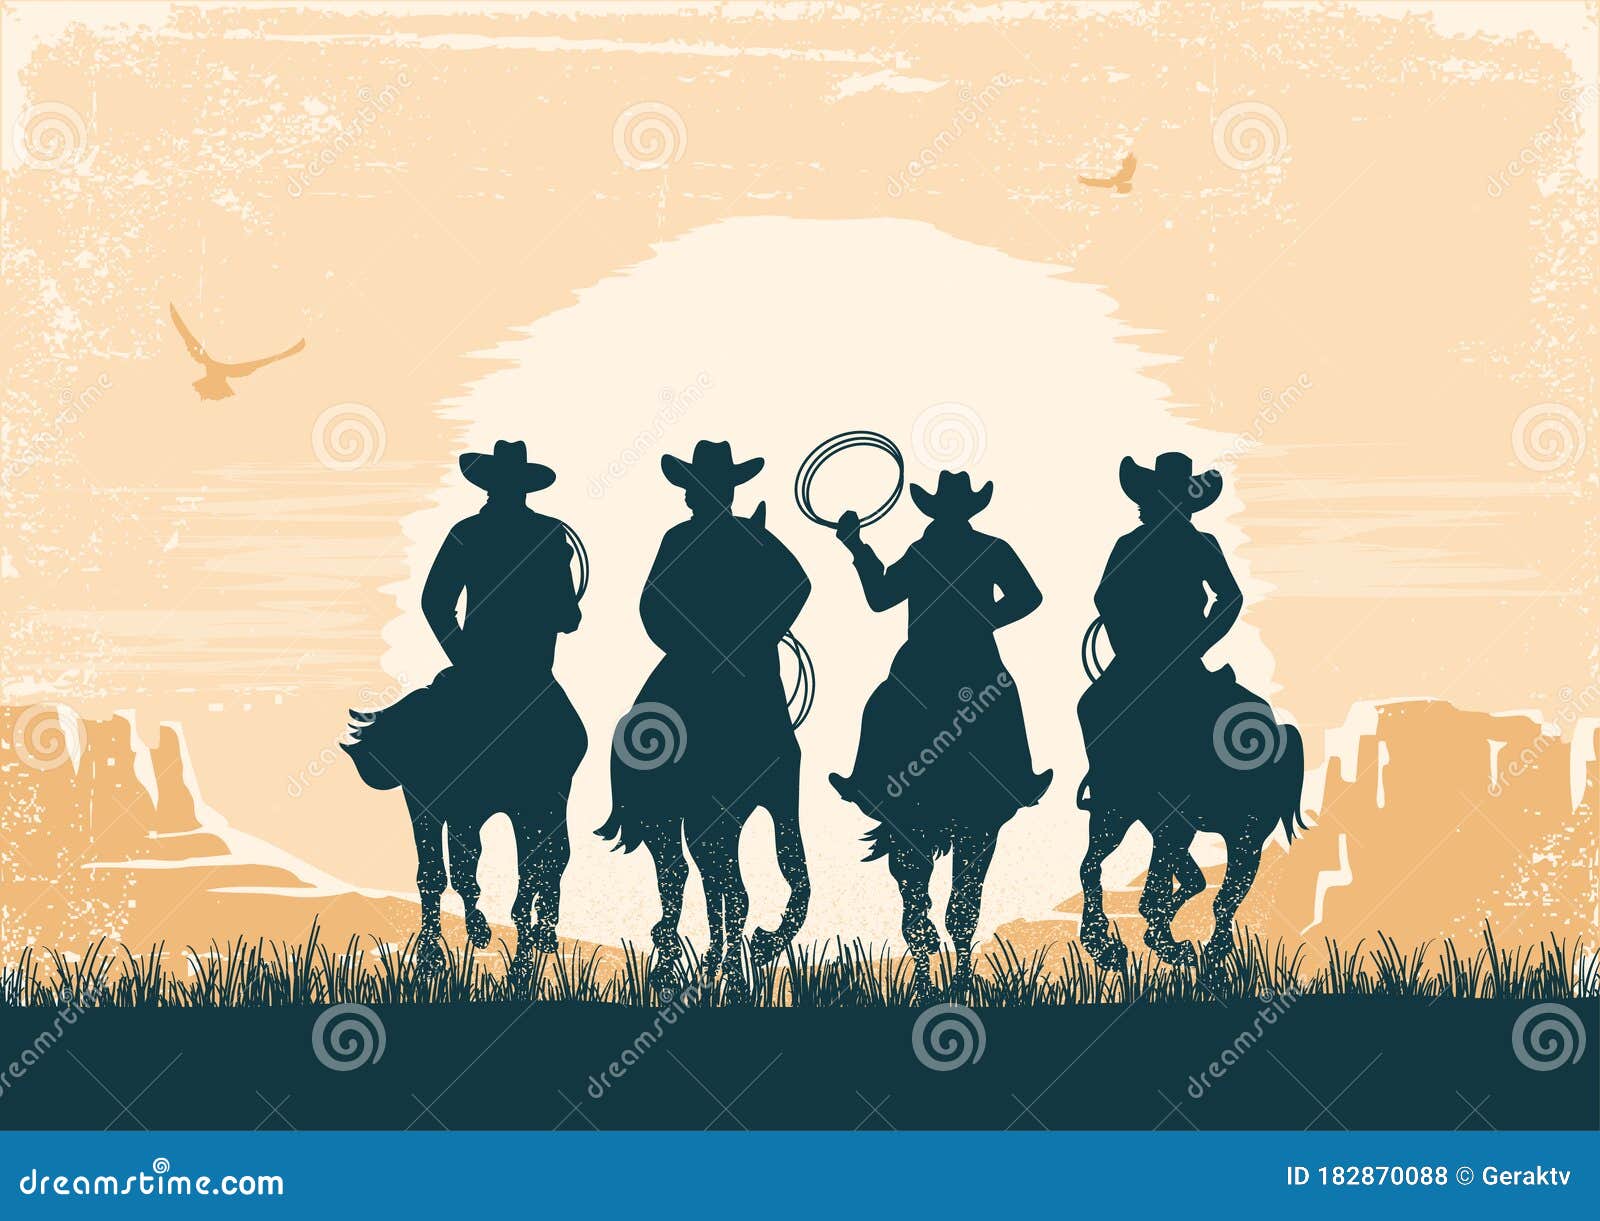 cowboys silhouette riding horses at sunset landscape. vintage  prairie desert with sun and canyon on old paper texture